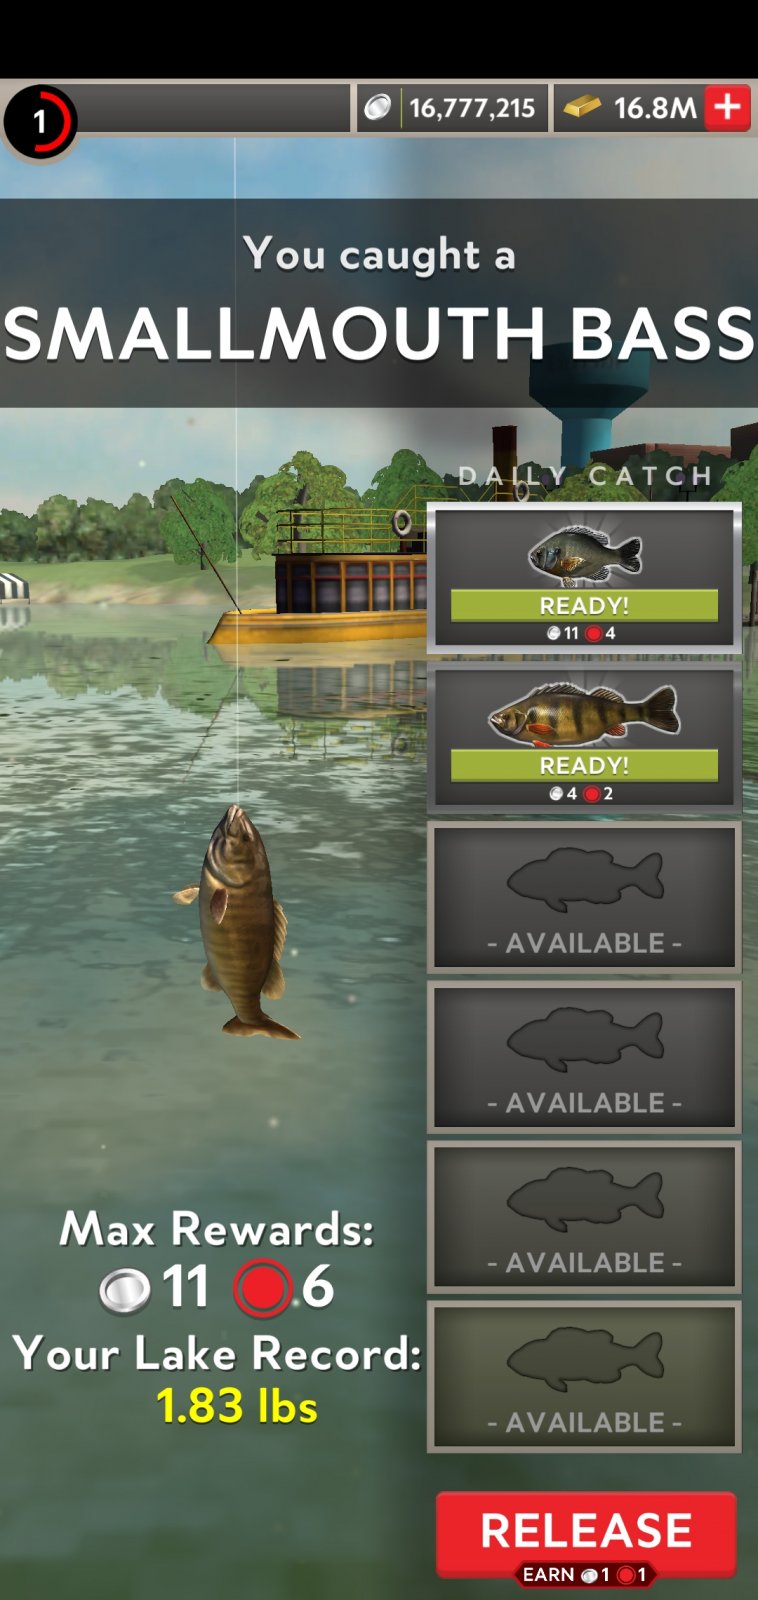 Download Rapala Fishing - Daily Catch (Mod Money) 1.6.2 APK For Android